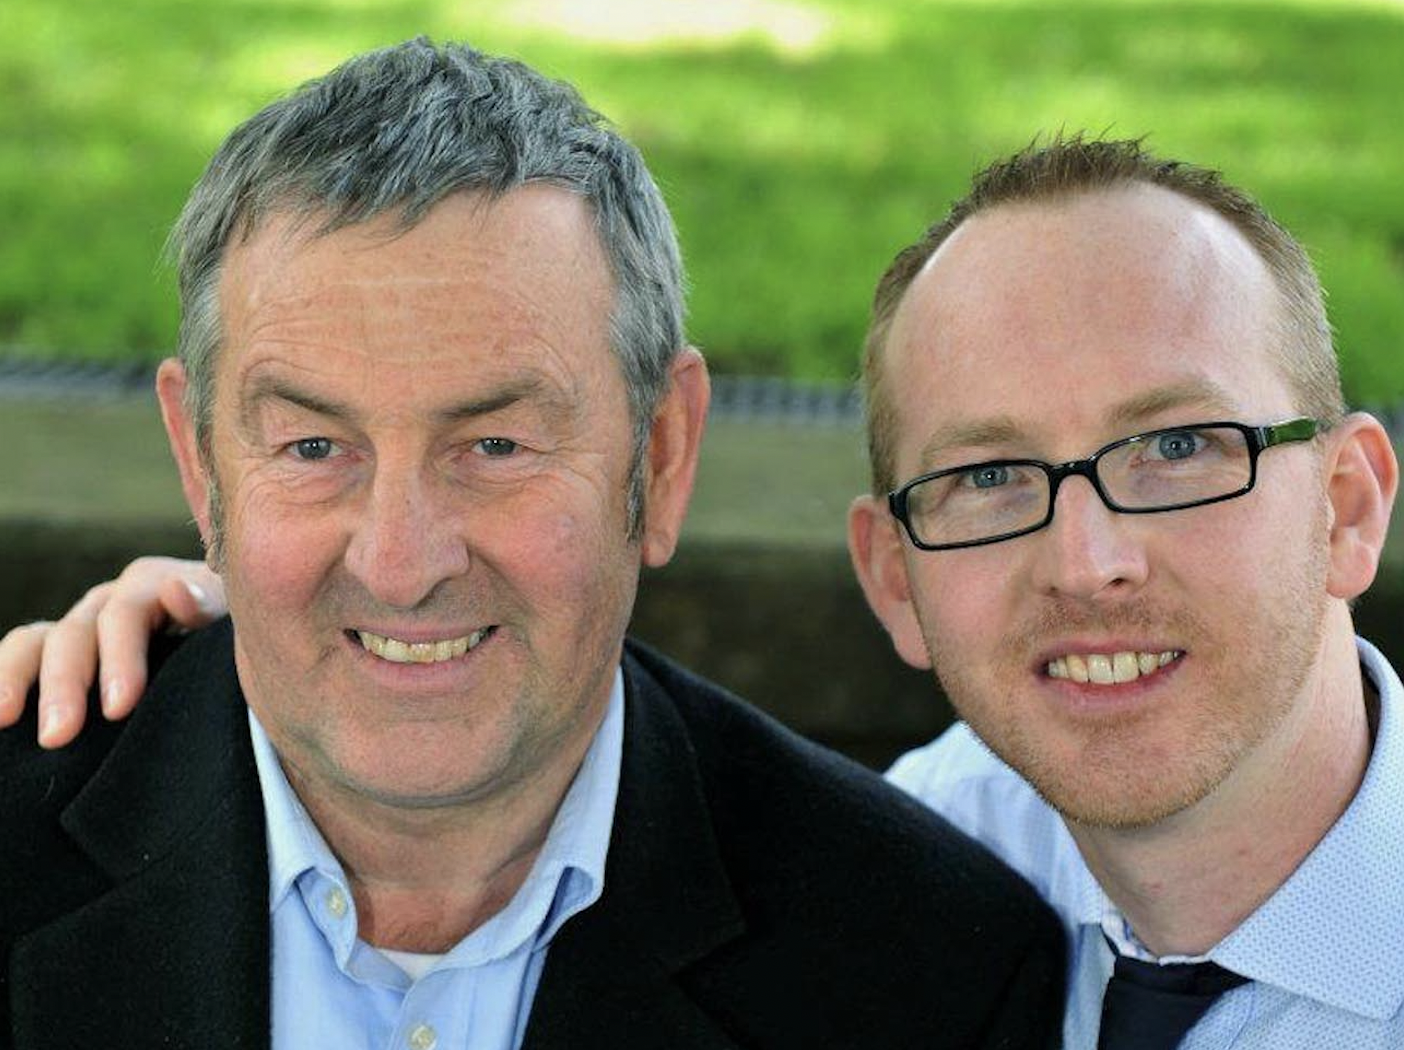 Nathan and his dad, Geoff. (Source: supplied)